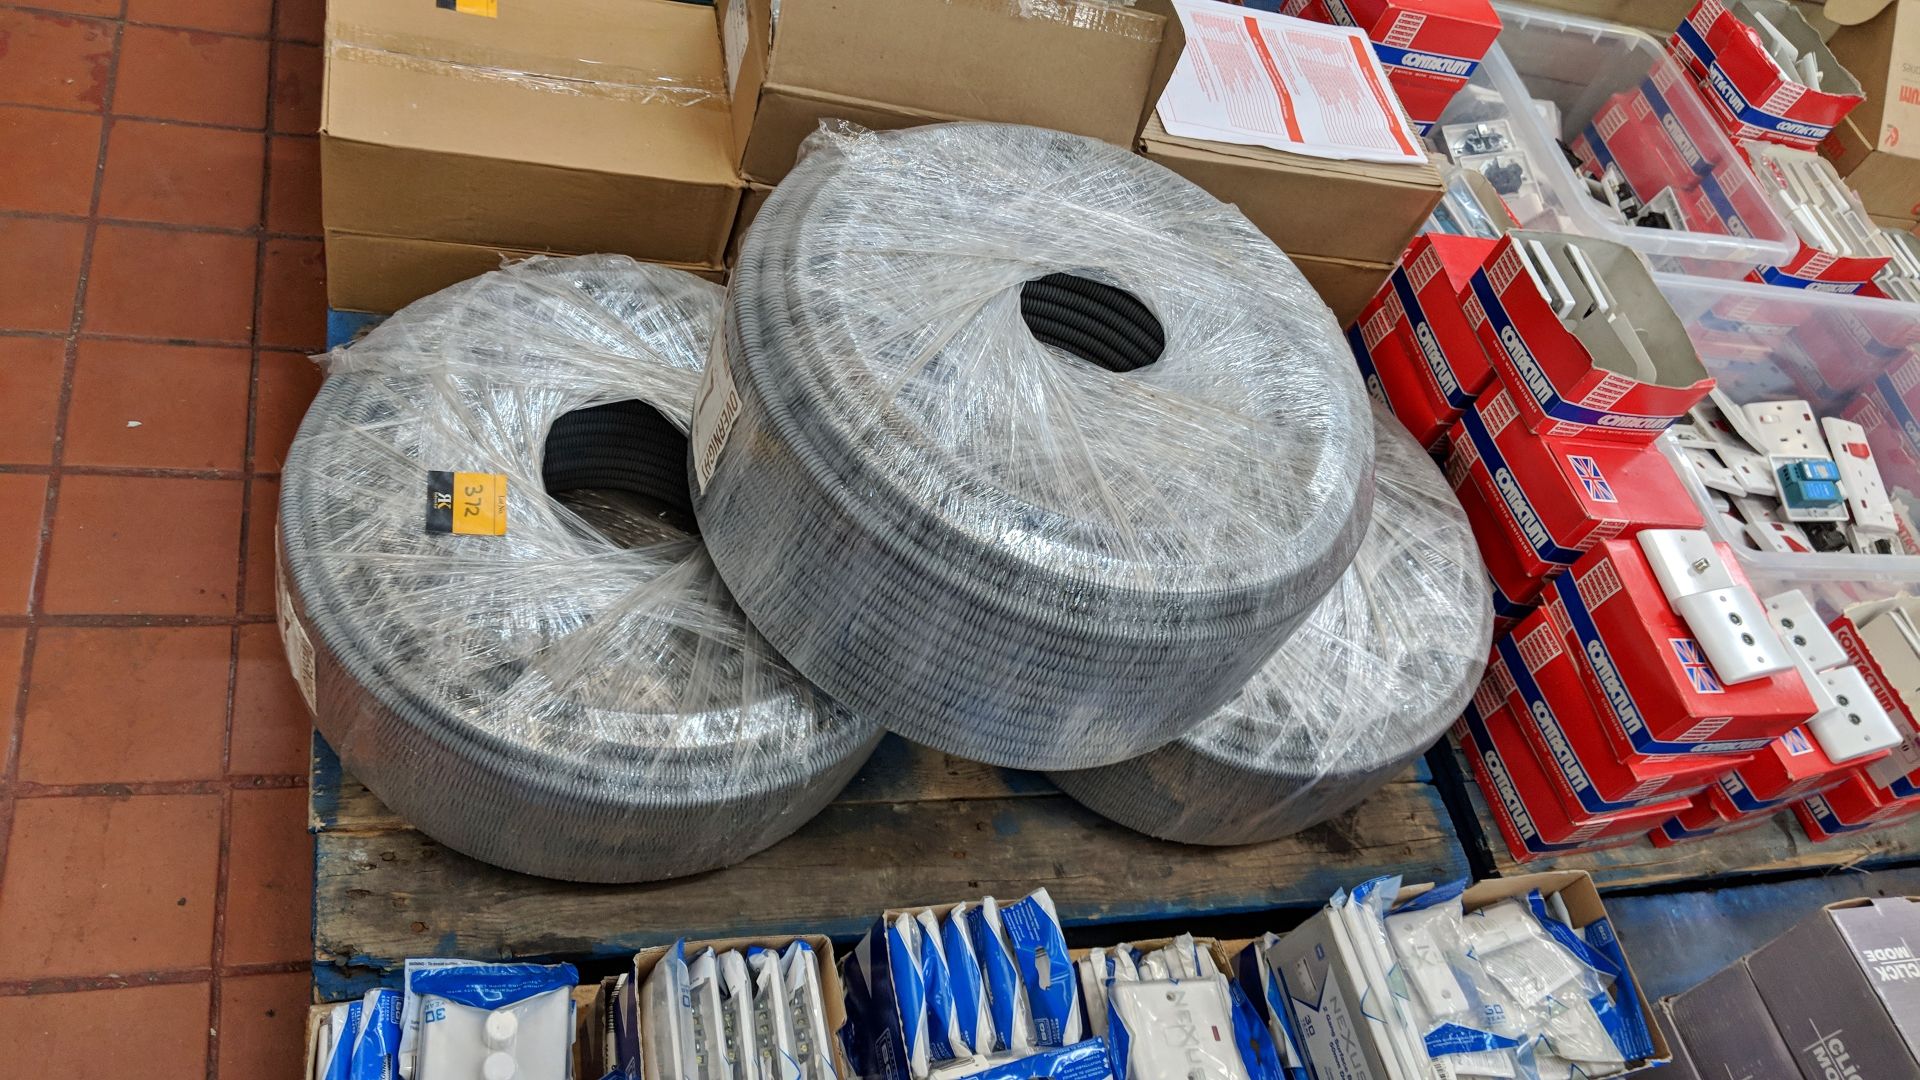 3 off large reels of flexible plastic ducting/tubing The vast majority of products in this auction - Image 3 of 3